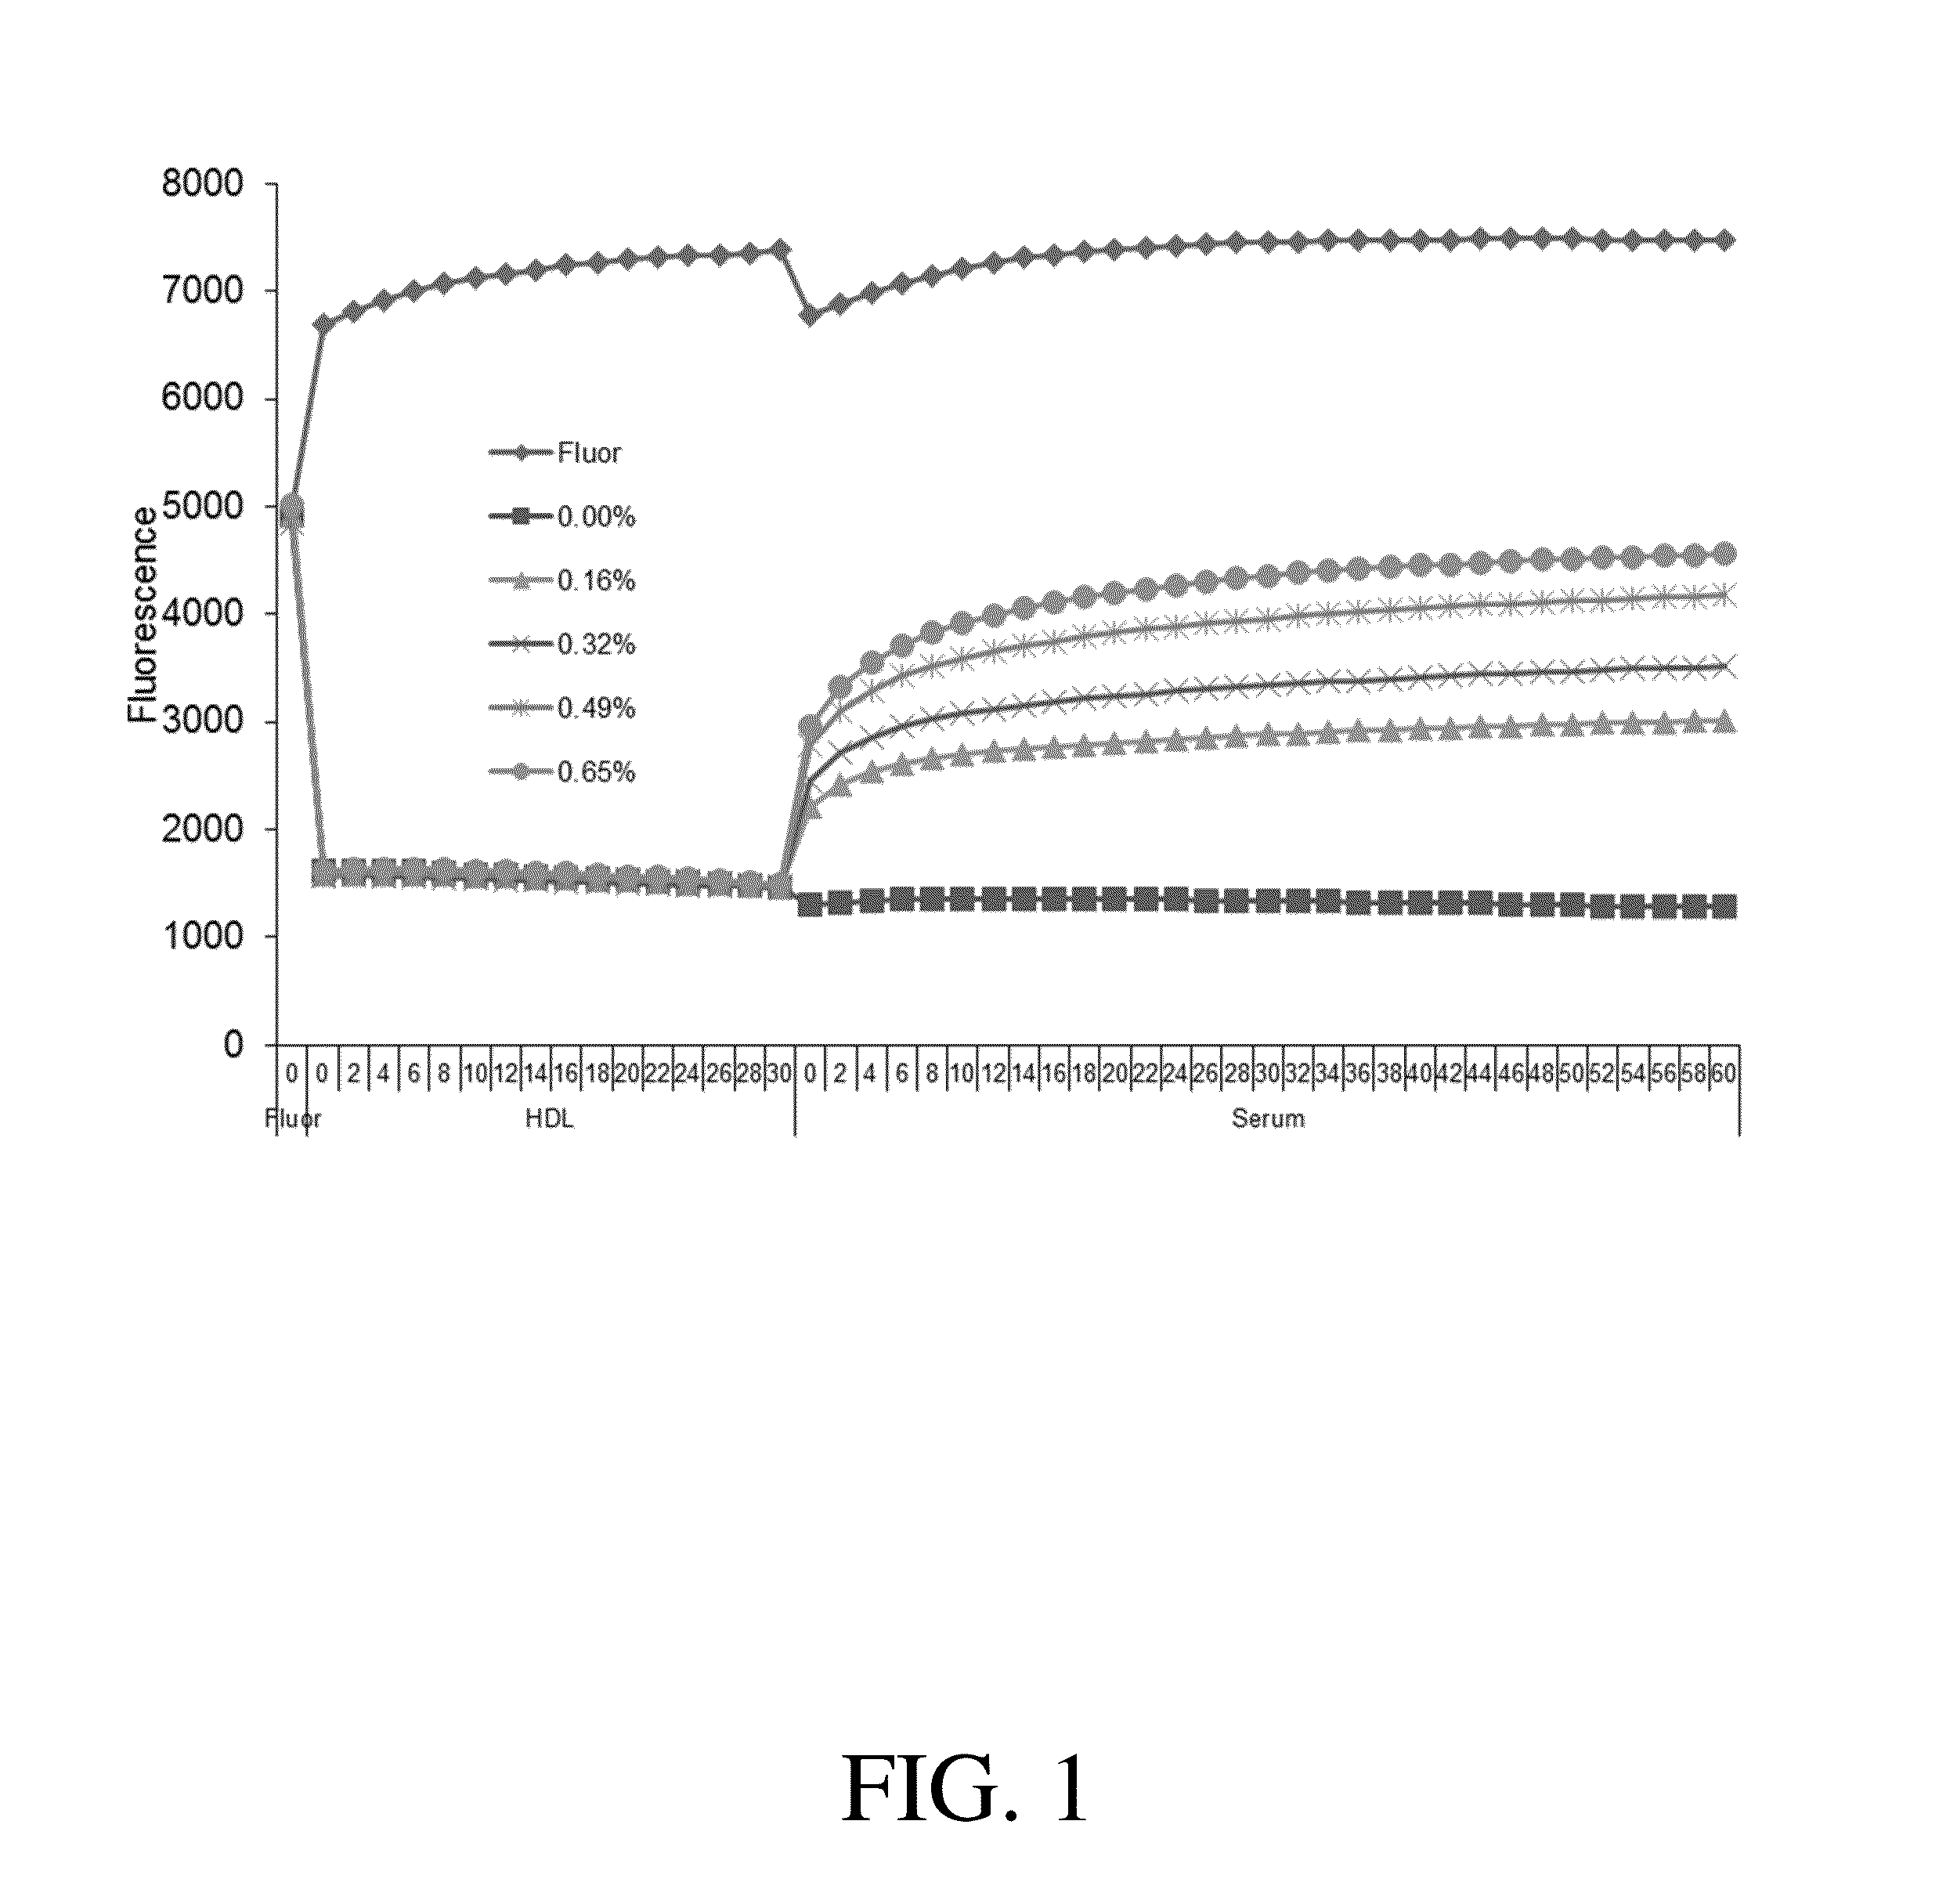 Assays for measuring binding kinetics and binding capacity of acceptors for lipophilic or amphilphilic molecules